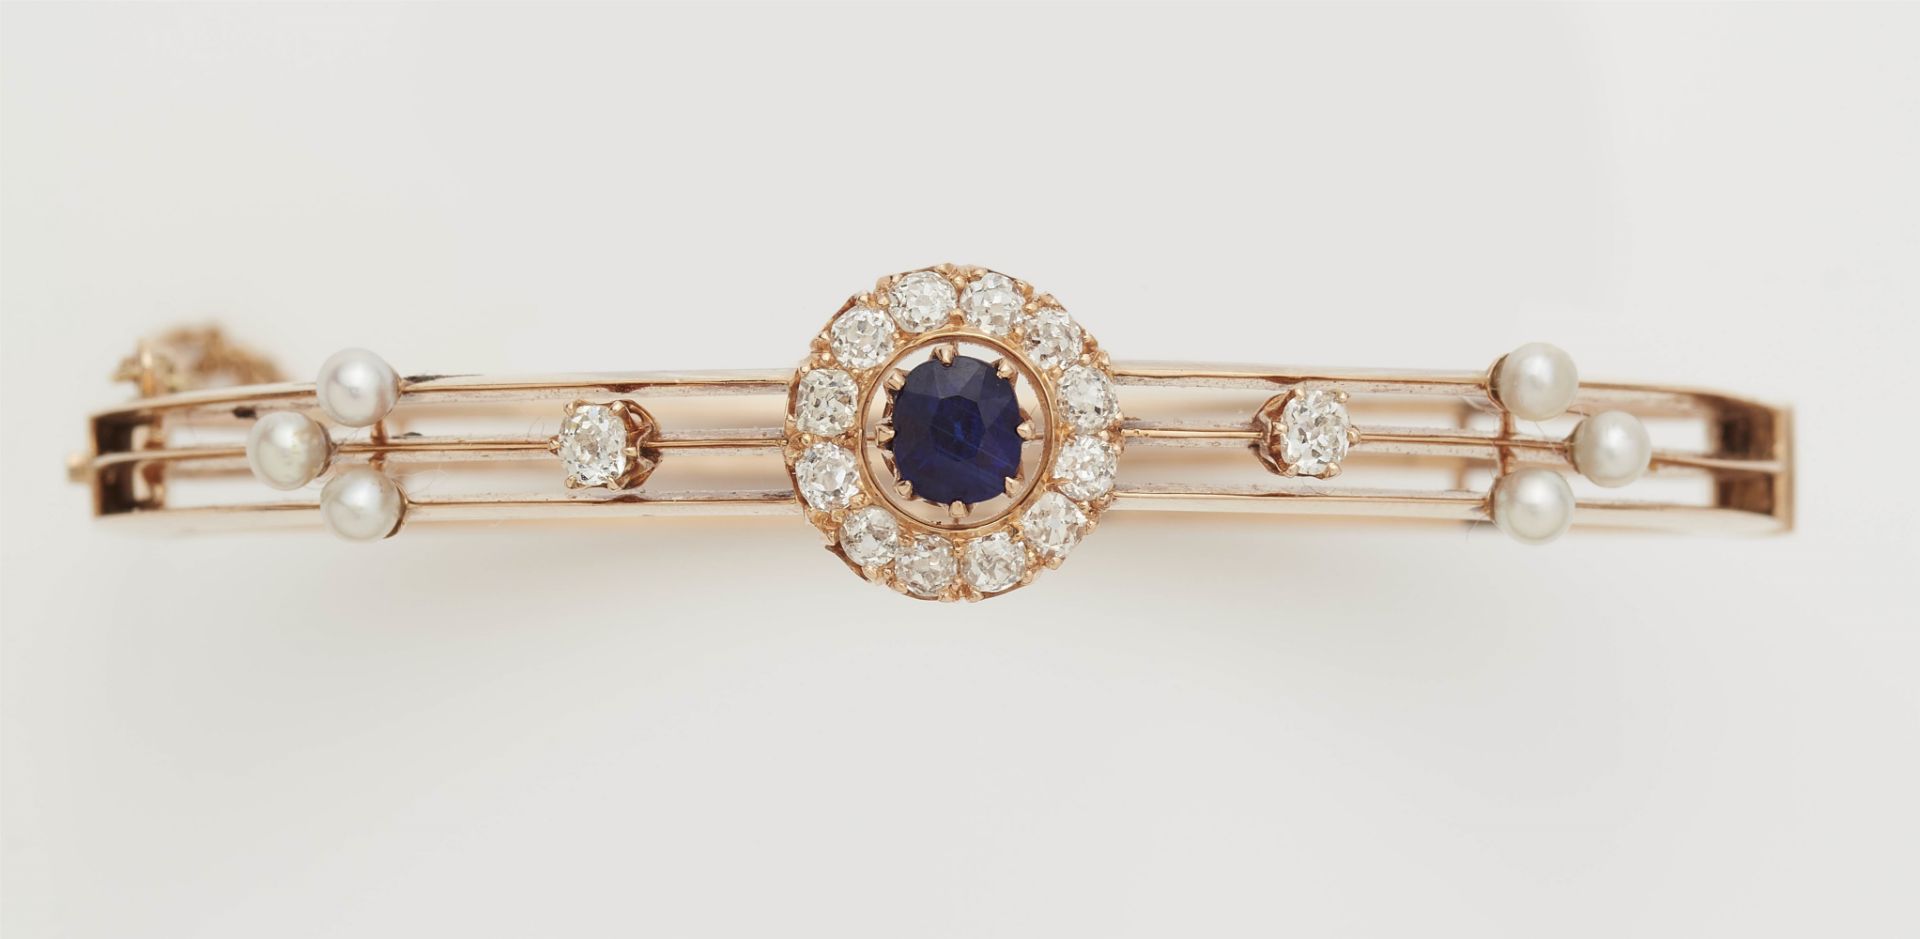 A late 19th century 14k rose gold diamond pearl and fine sapphire bangle. - Image 3 of 3